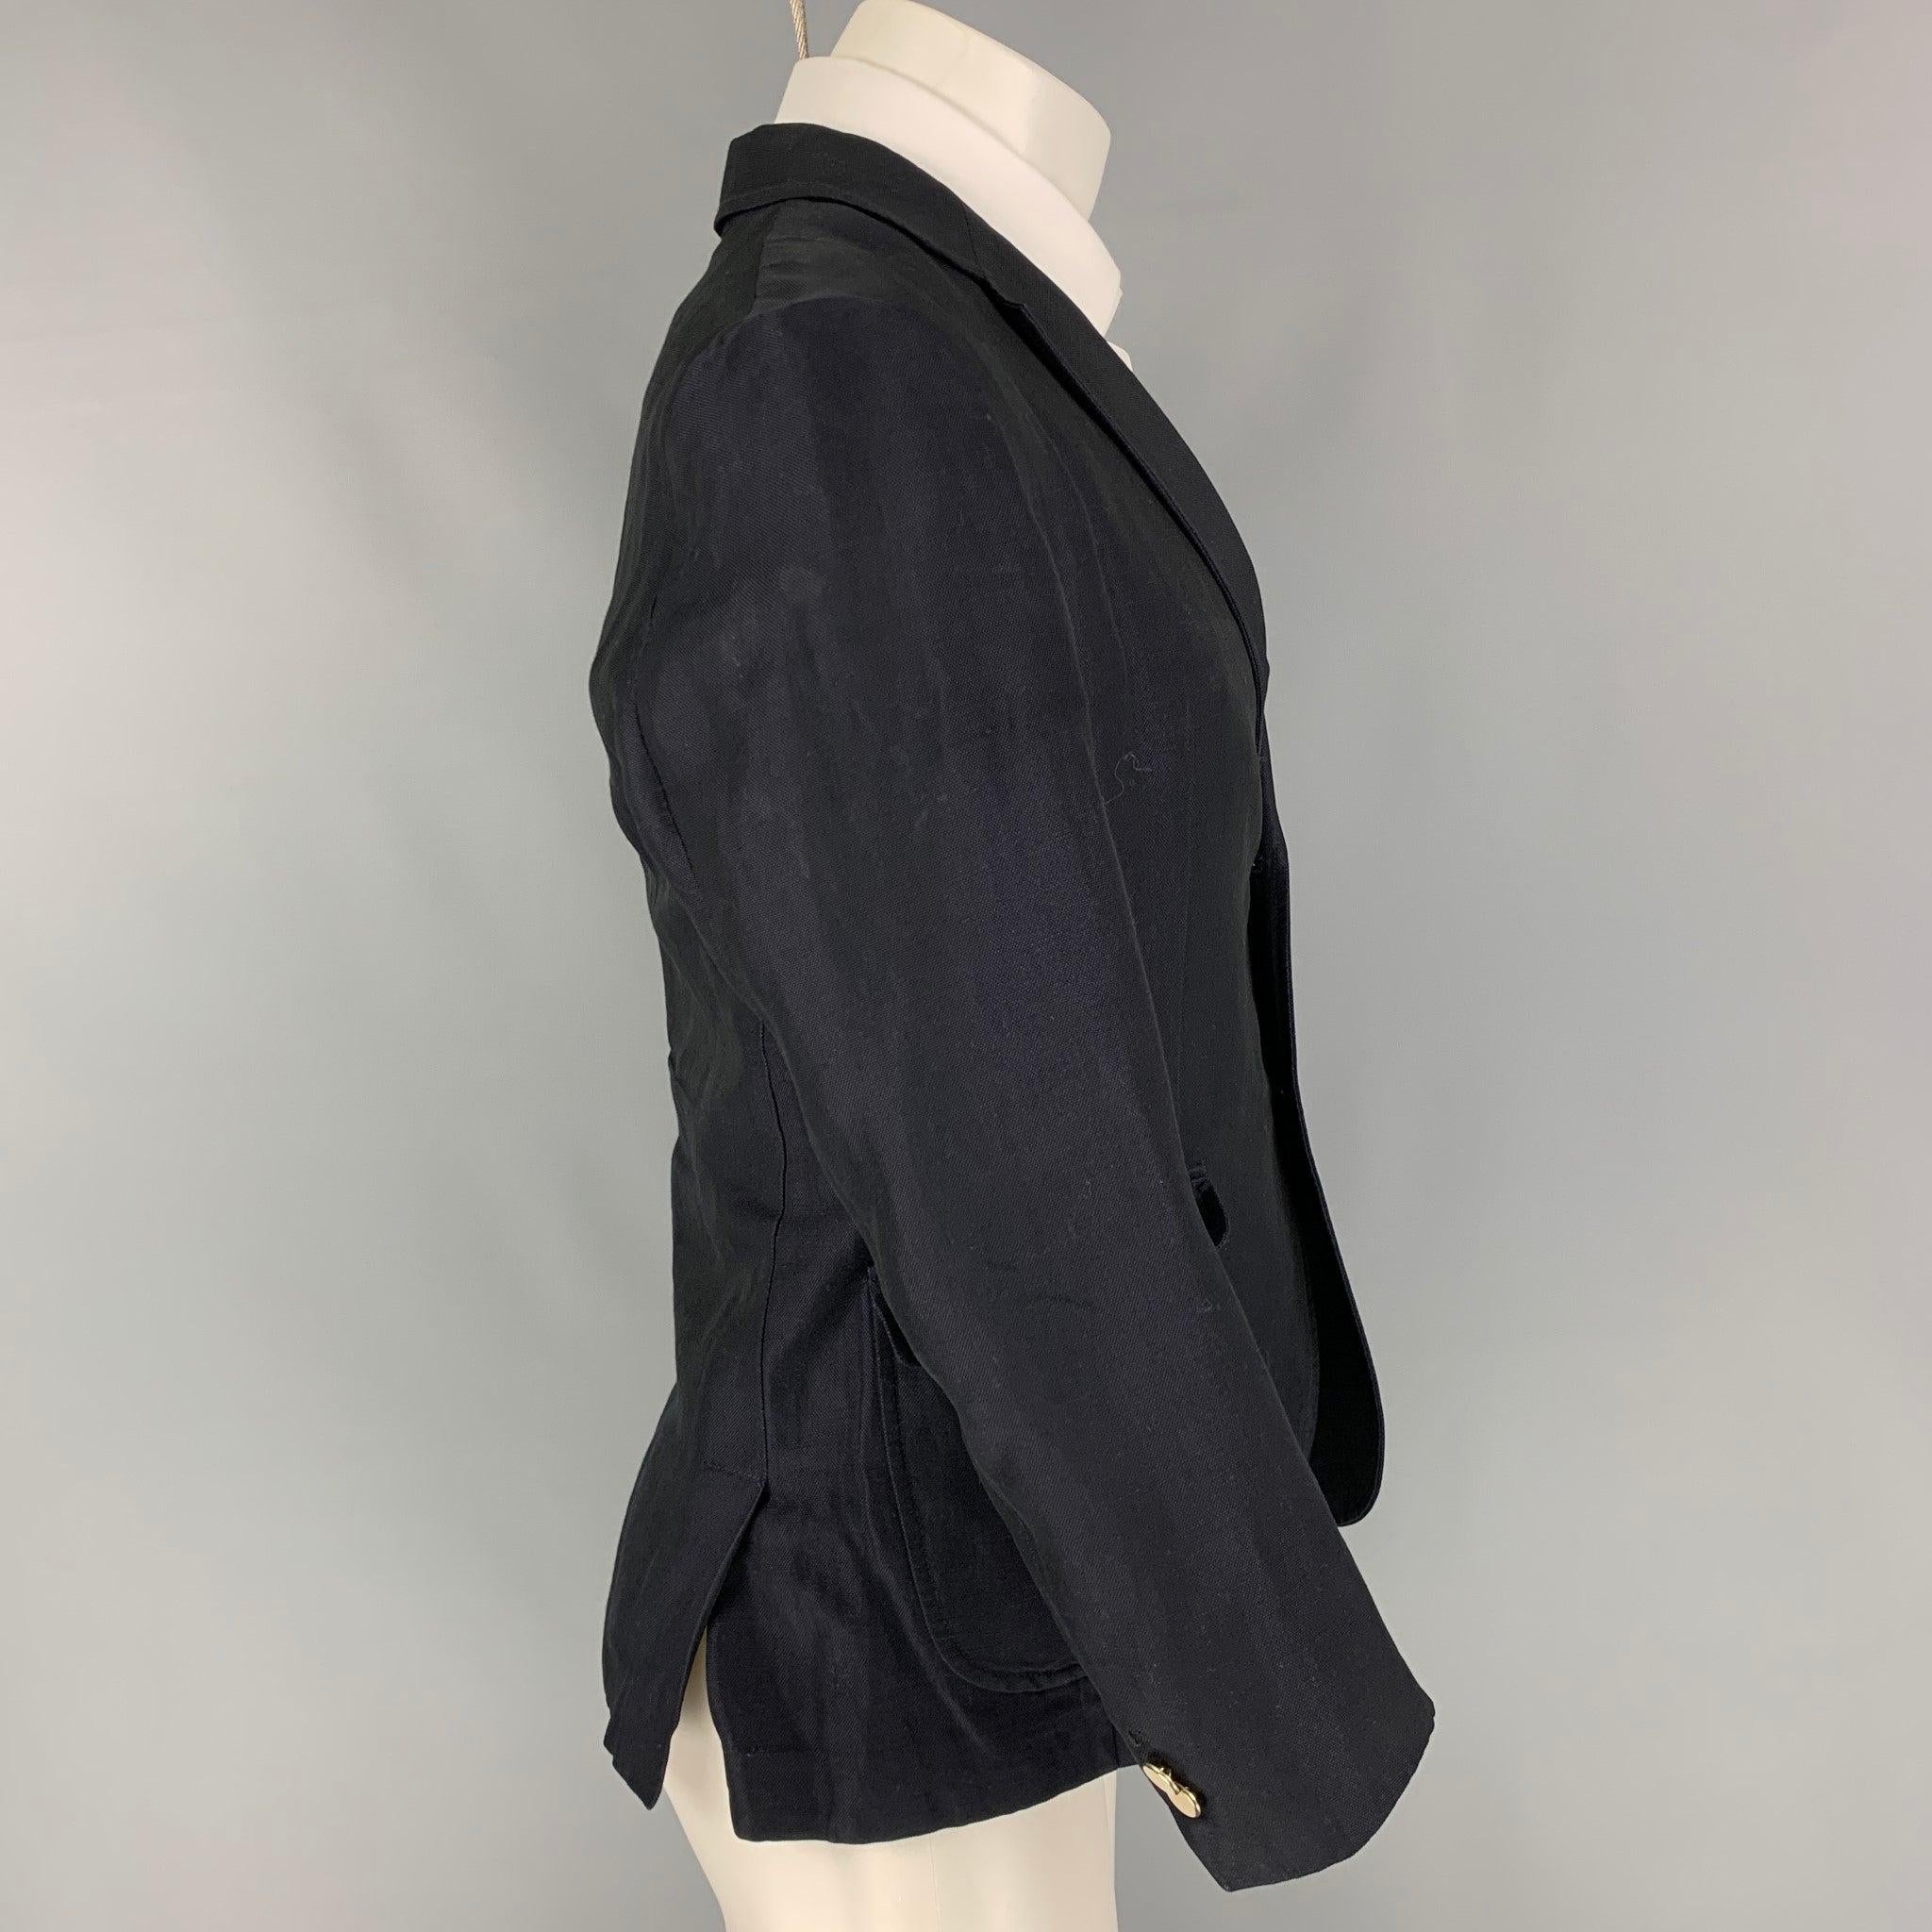 BAND OF OUTSIDERS Size 40 Navy Cotton / Linen Sport Coat In Good Condition For Sale In San Francisco, CA